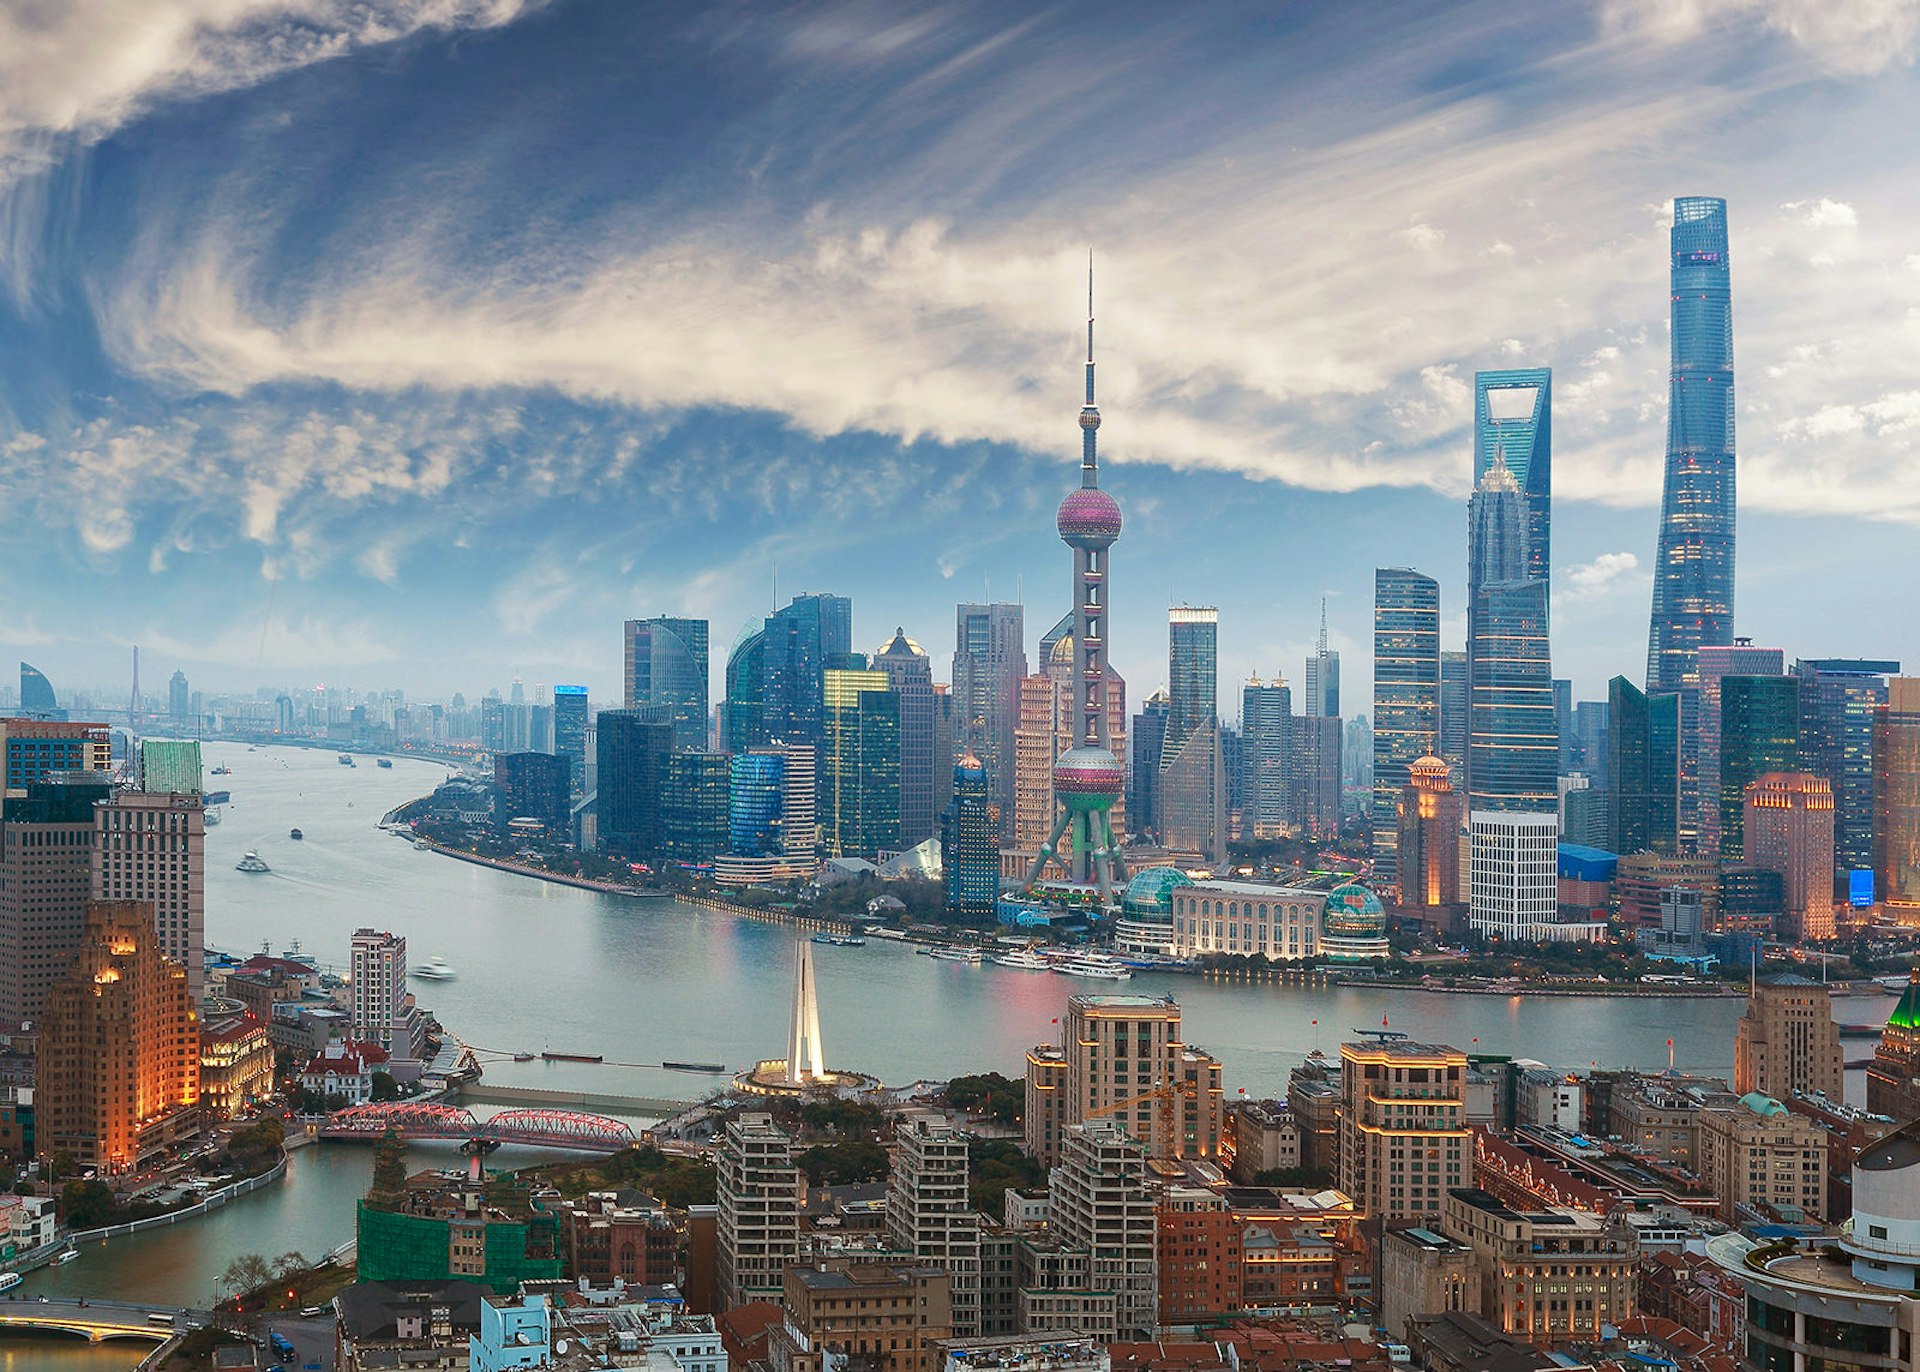 Get a bird’s eye view of the new Shanghai skyline © 123ArtistImages / Getty Images